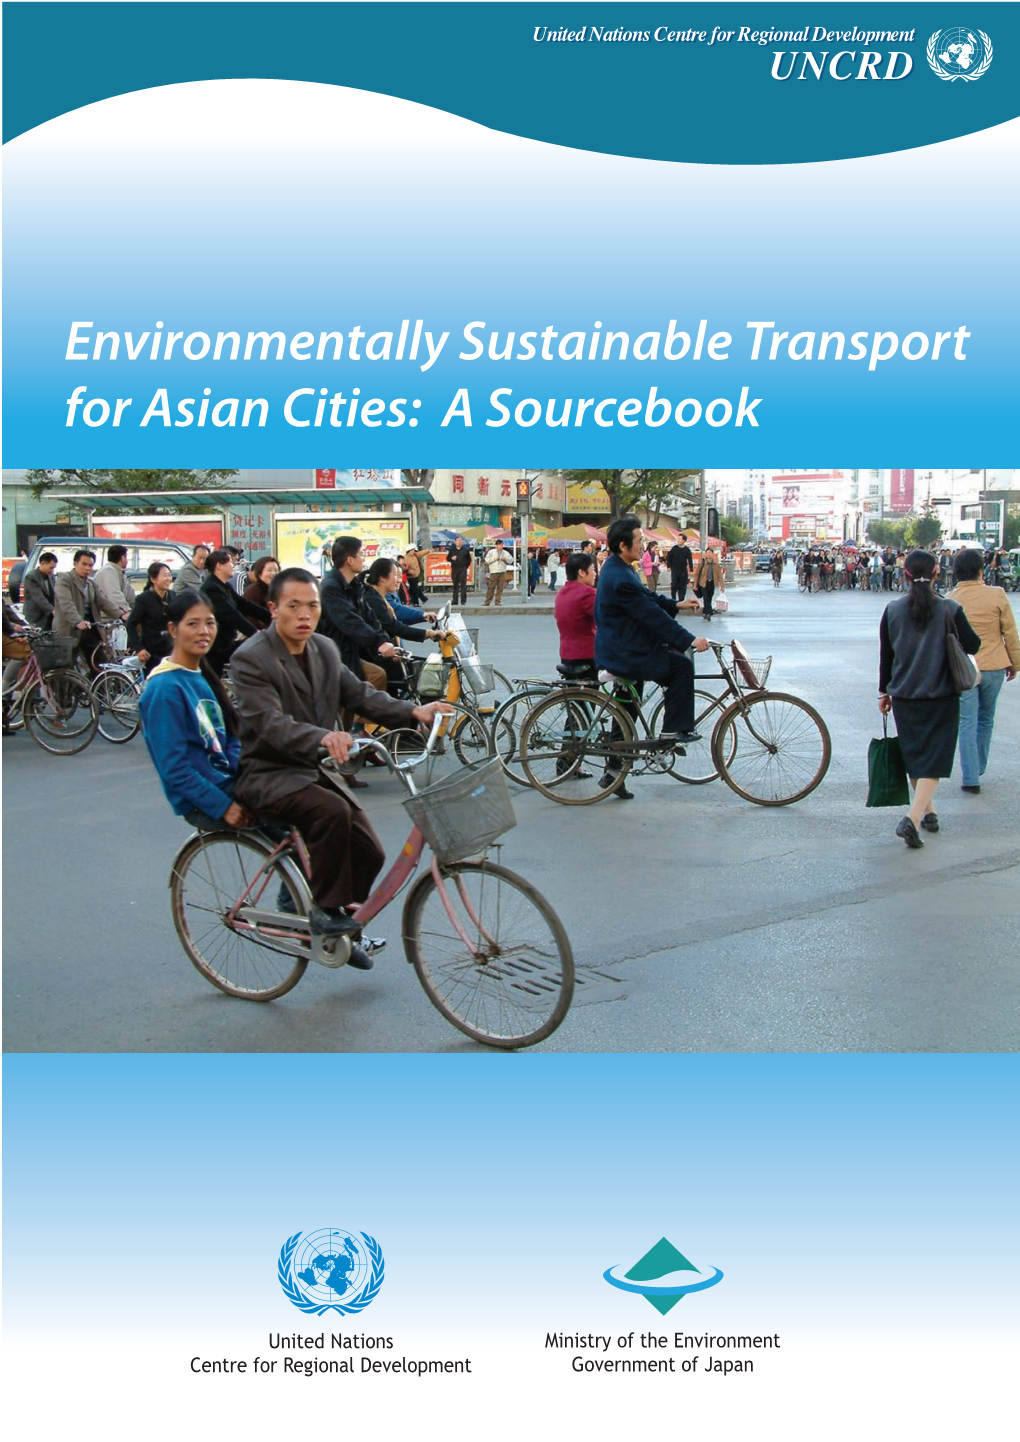 Introduction to Environmentally Sustainable Transport